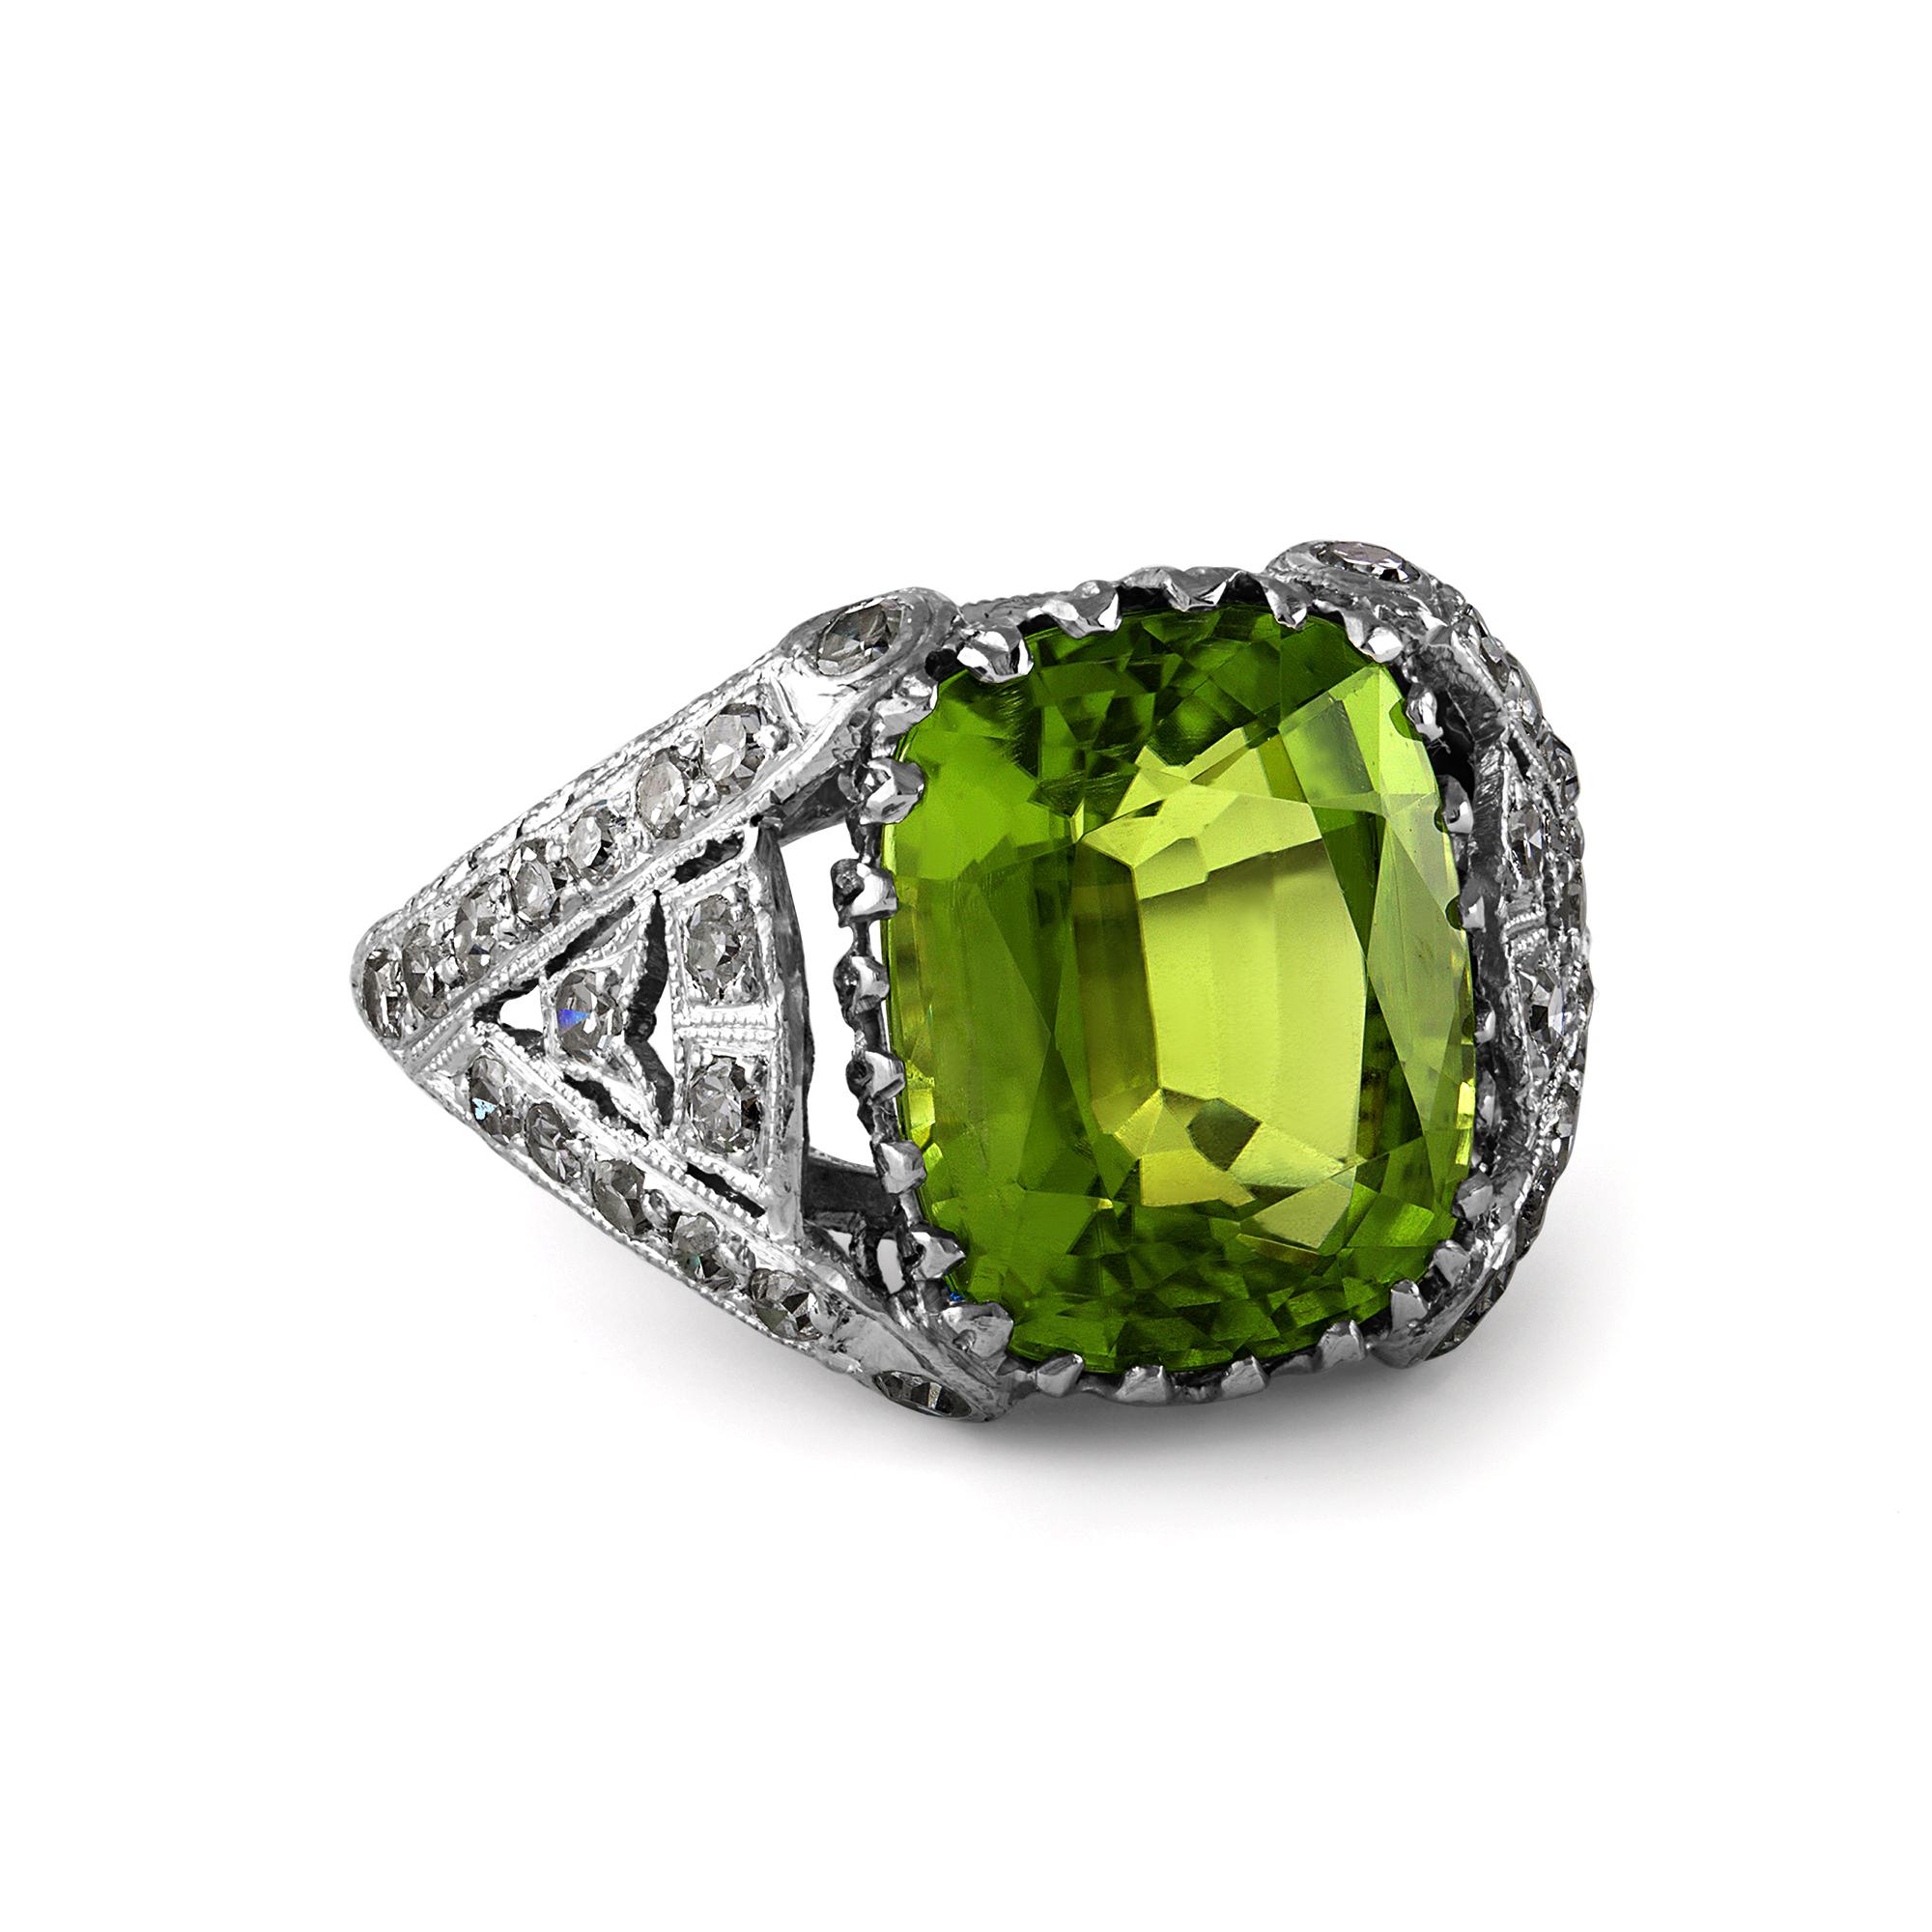 1915 Edwardian early Art Deco GIA 7.87ct Peridot & Diamond Platinum Antique Ring In Good Condition For Sale In New York, NY